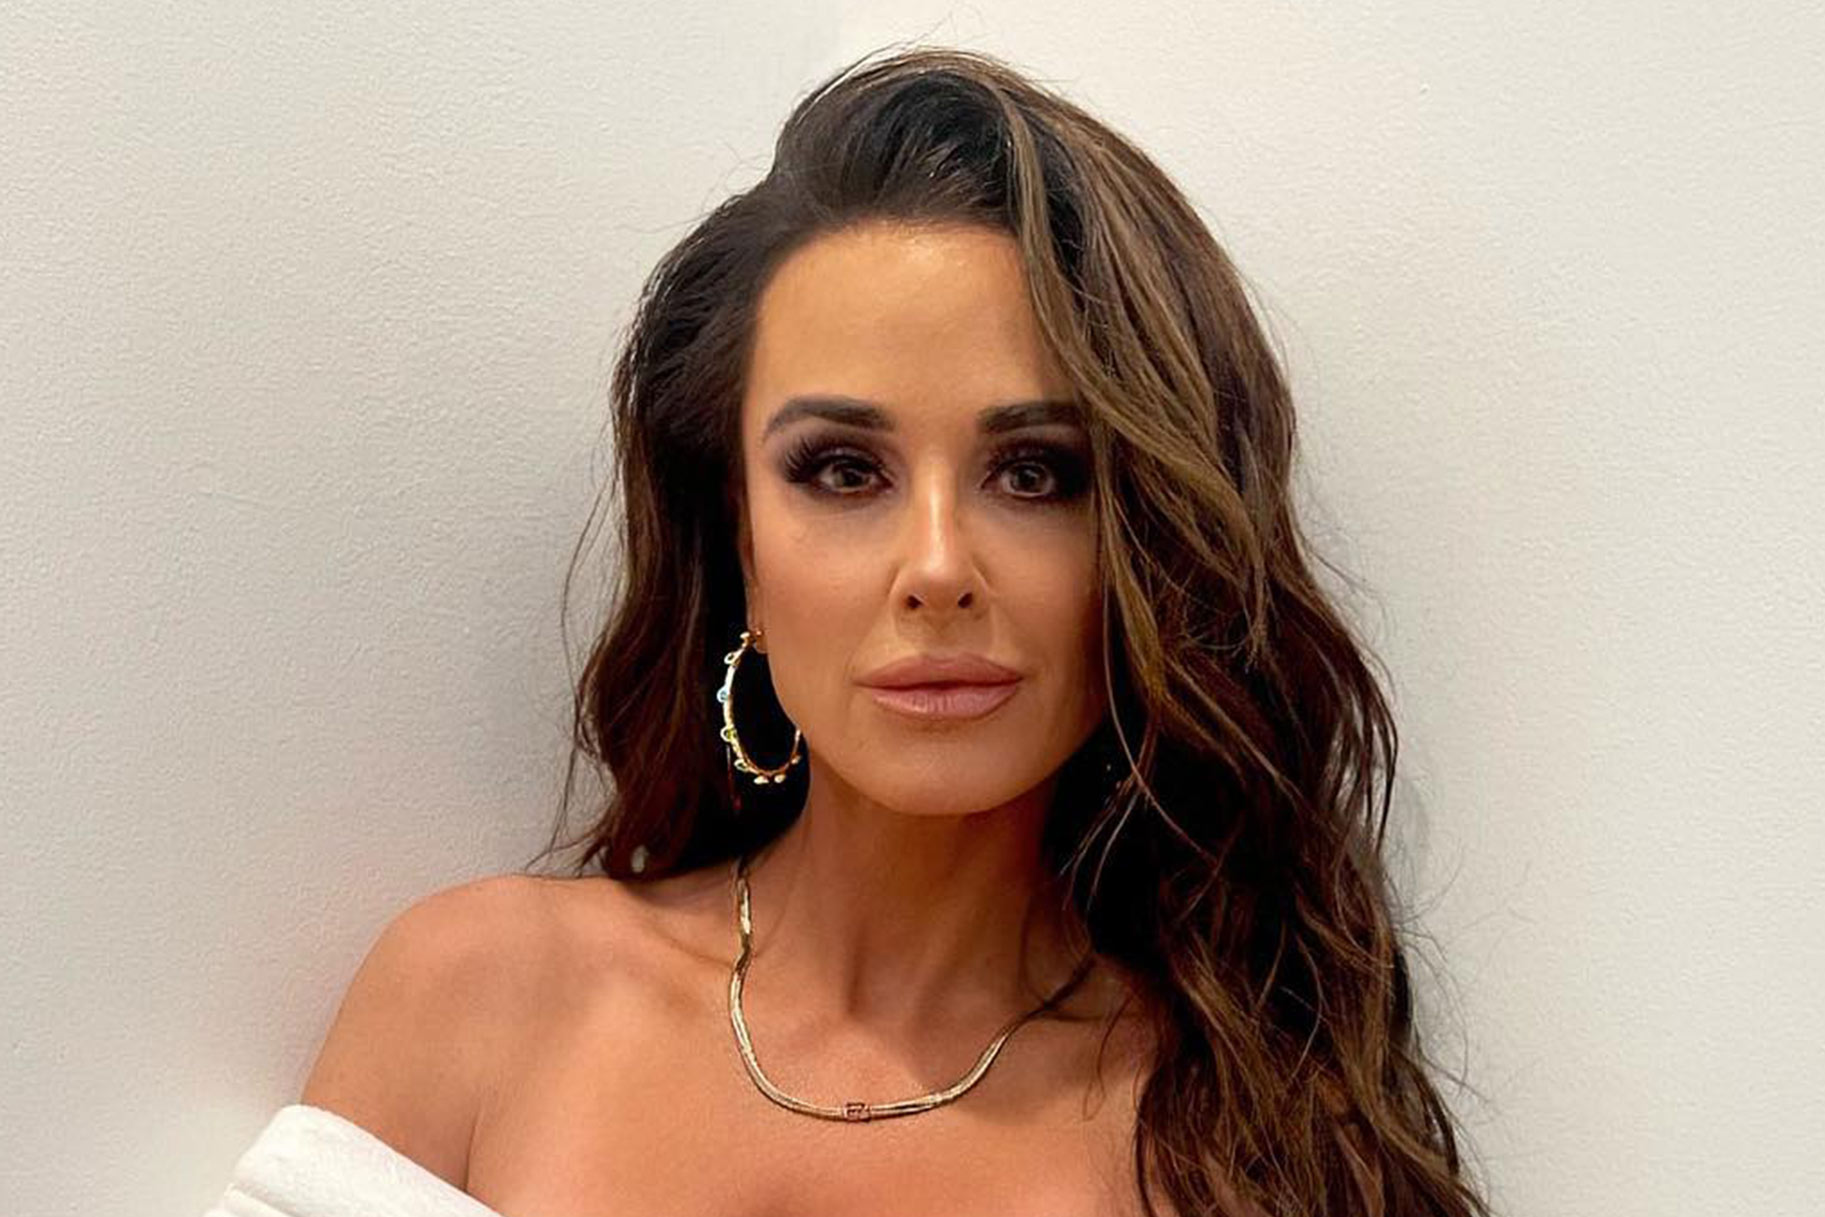 Kyle Richards posing in front of a white wall in a robe.